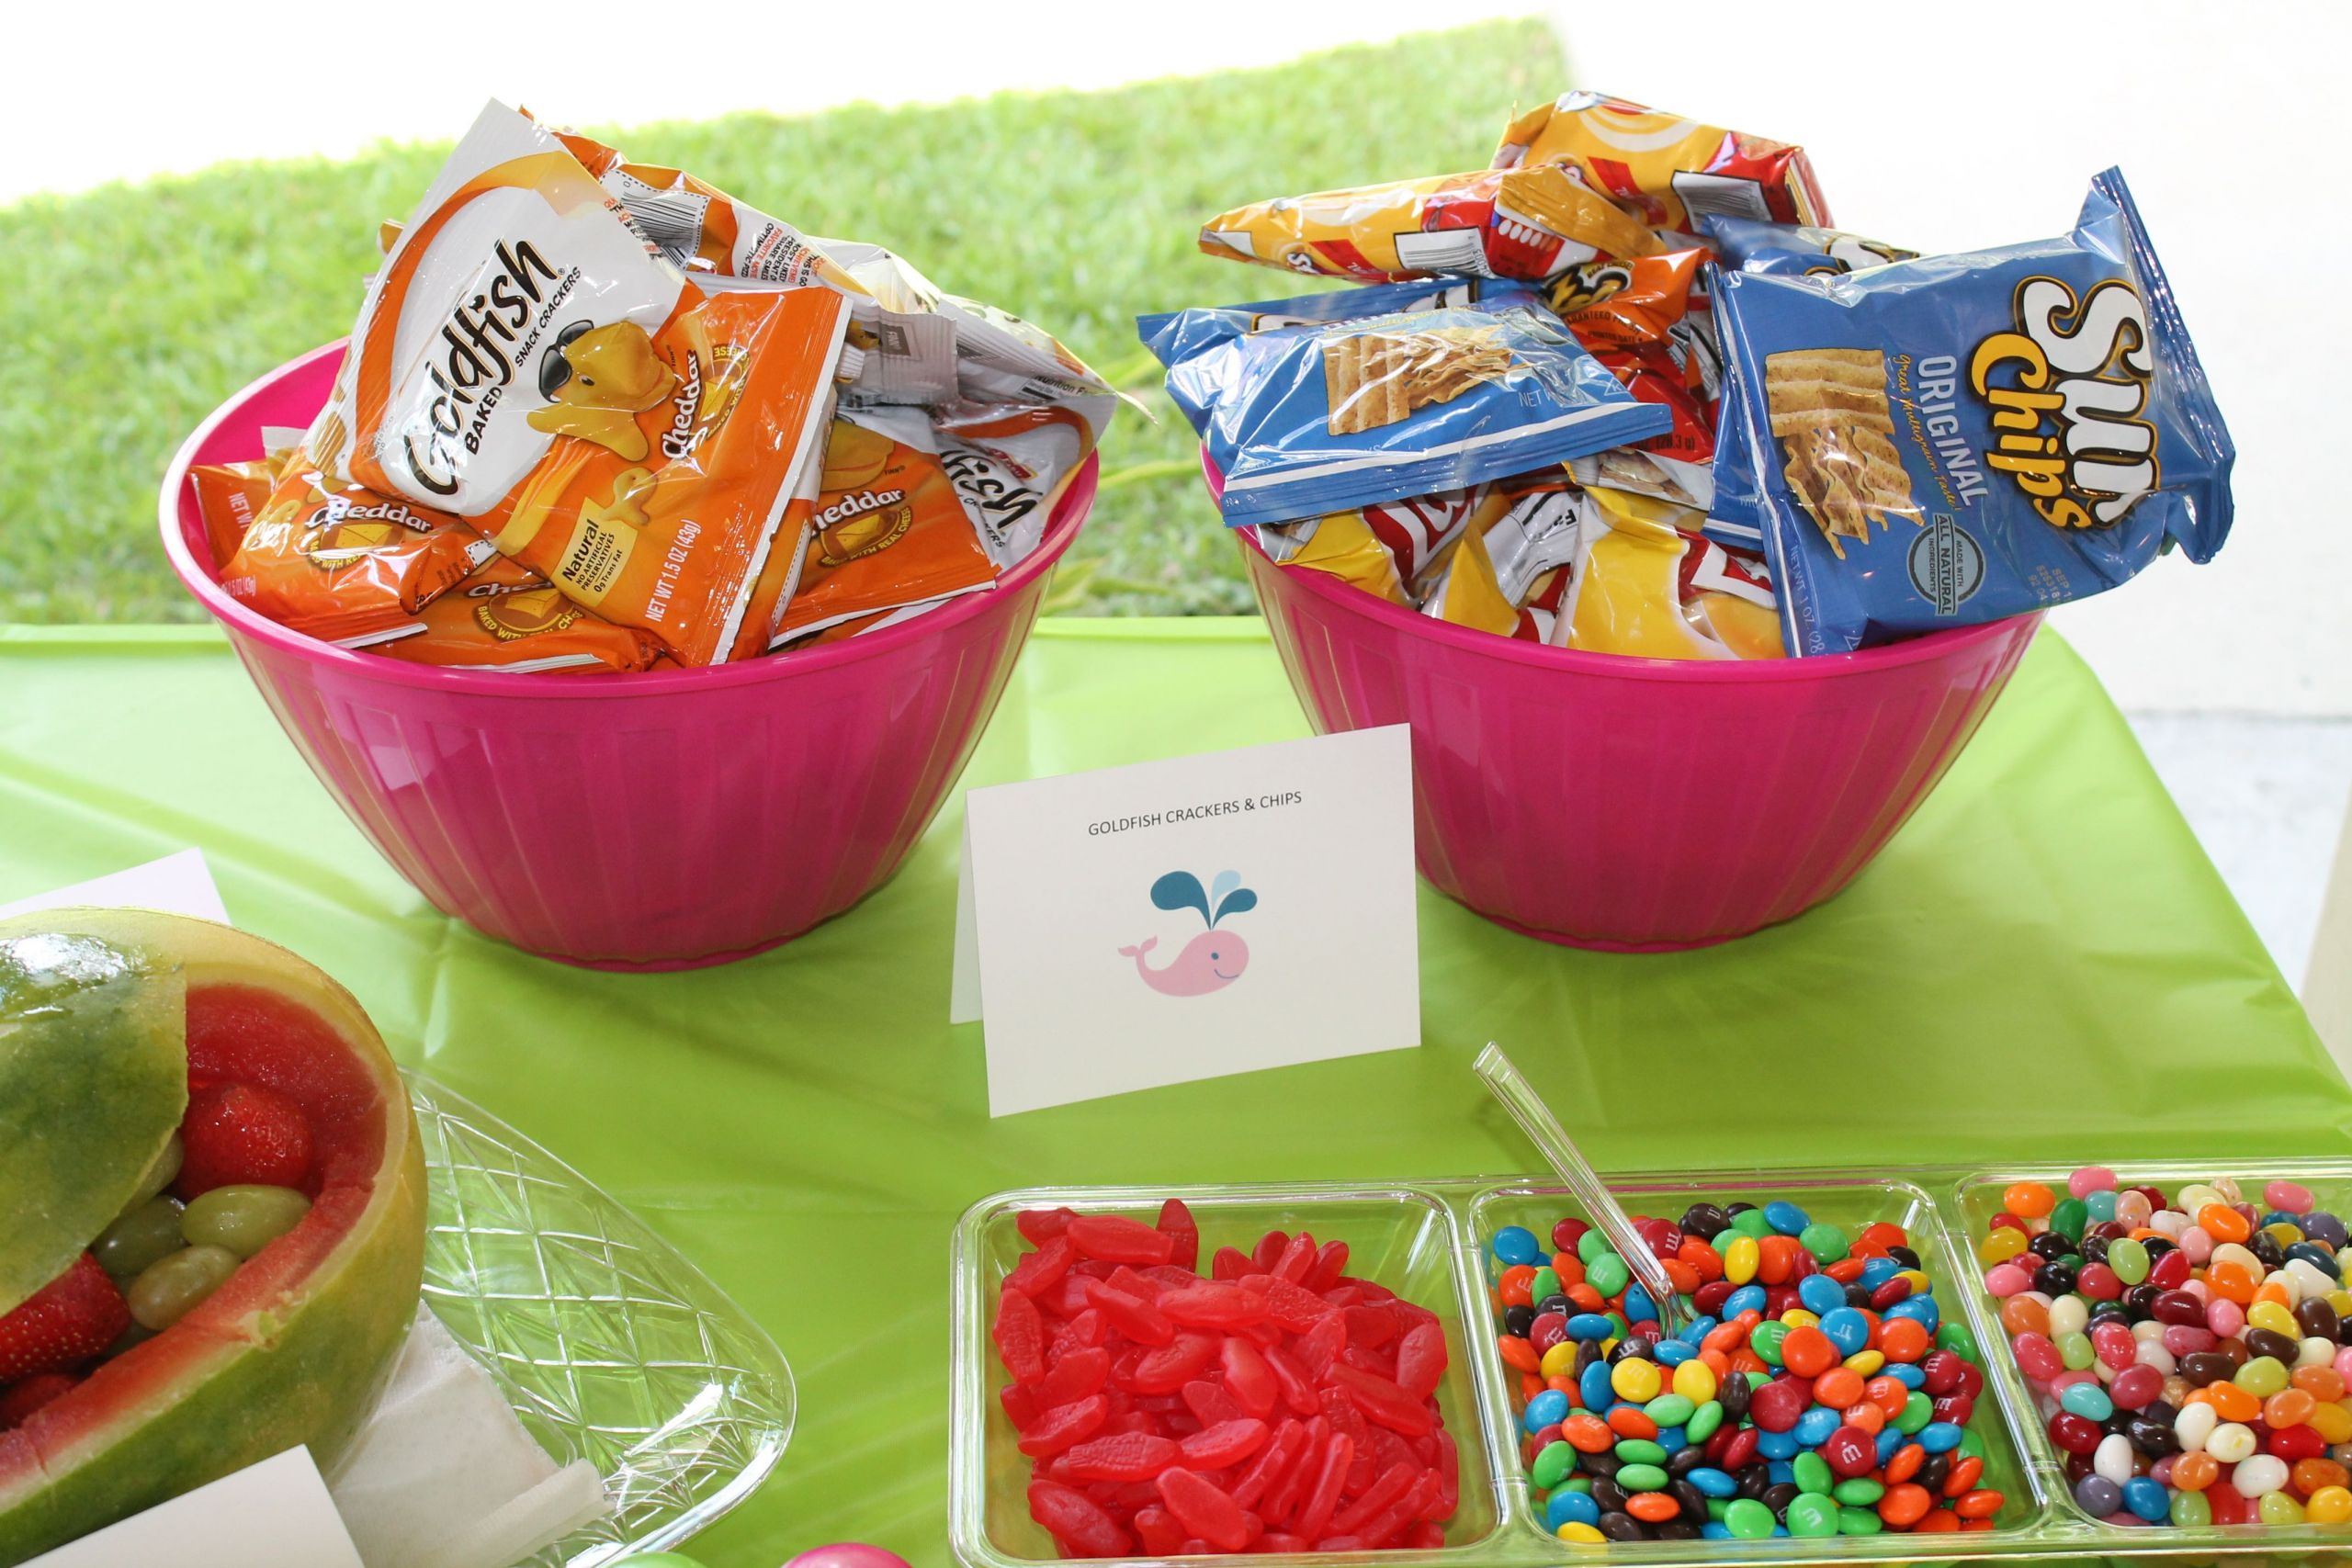 Pool Party Ideas For Food
 Goldfish crackers fit the theme but the chips were more